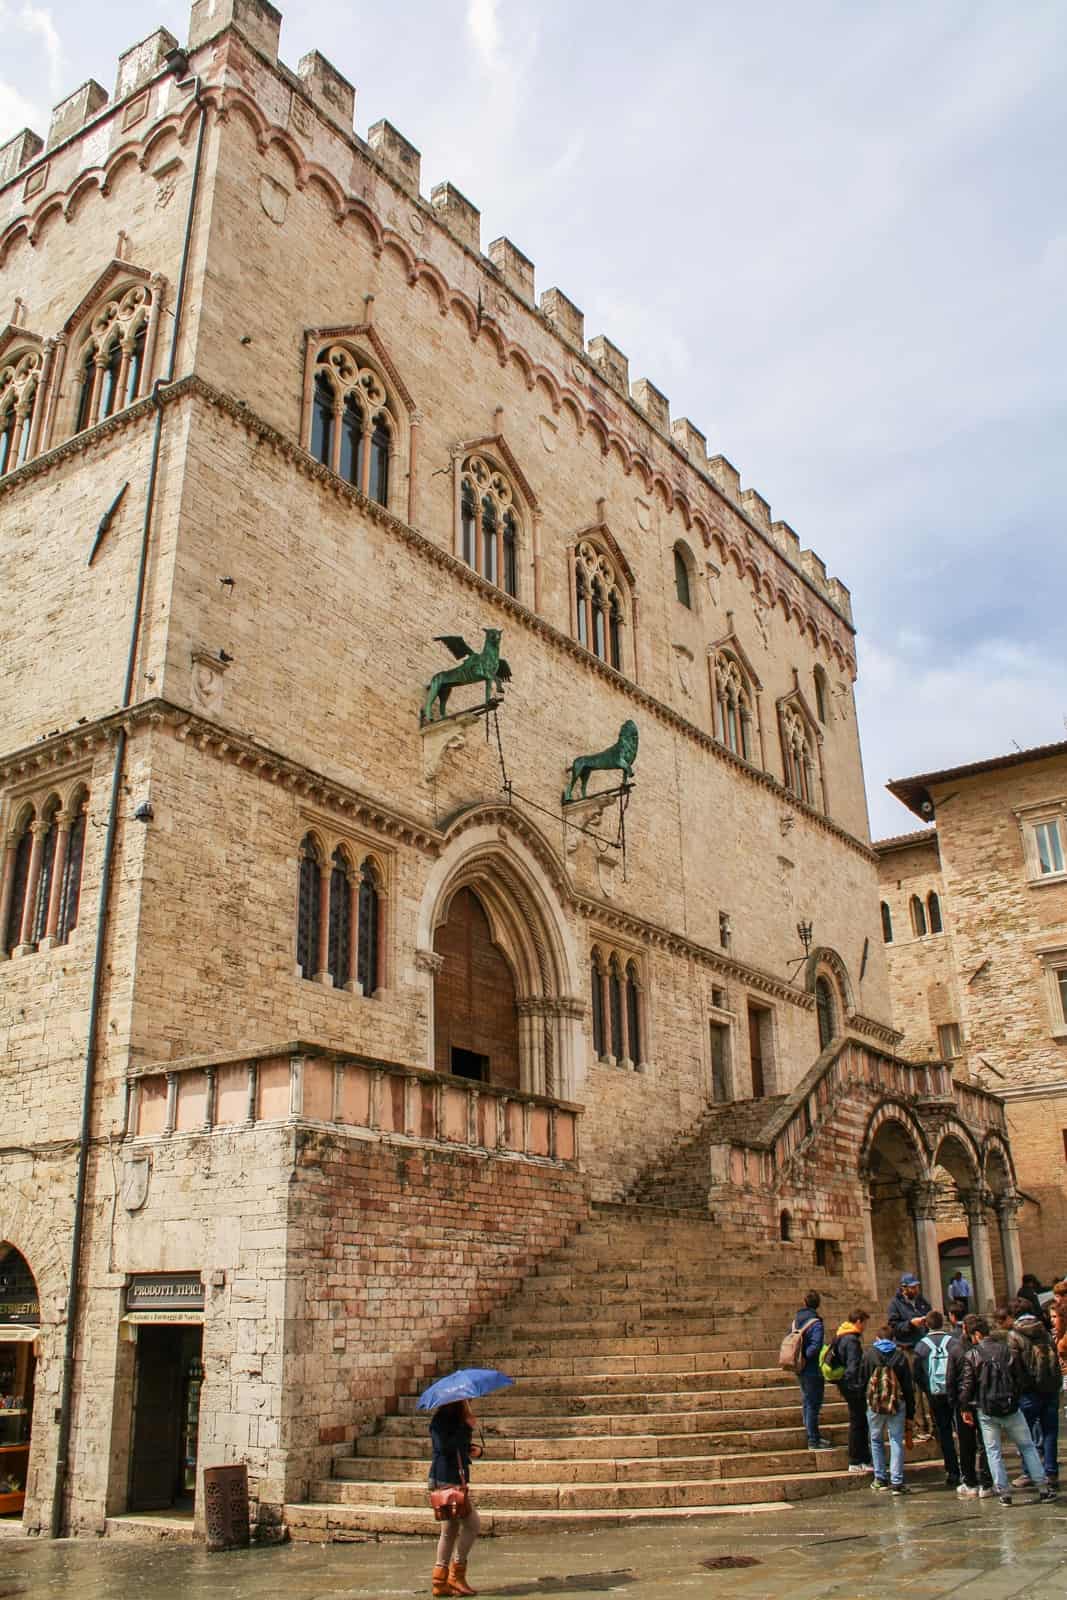 A walking tour in Perugia gathers outside of a gothic palace with green lion and dragon sculptures above its archway. 